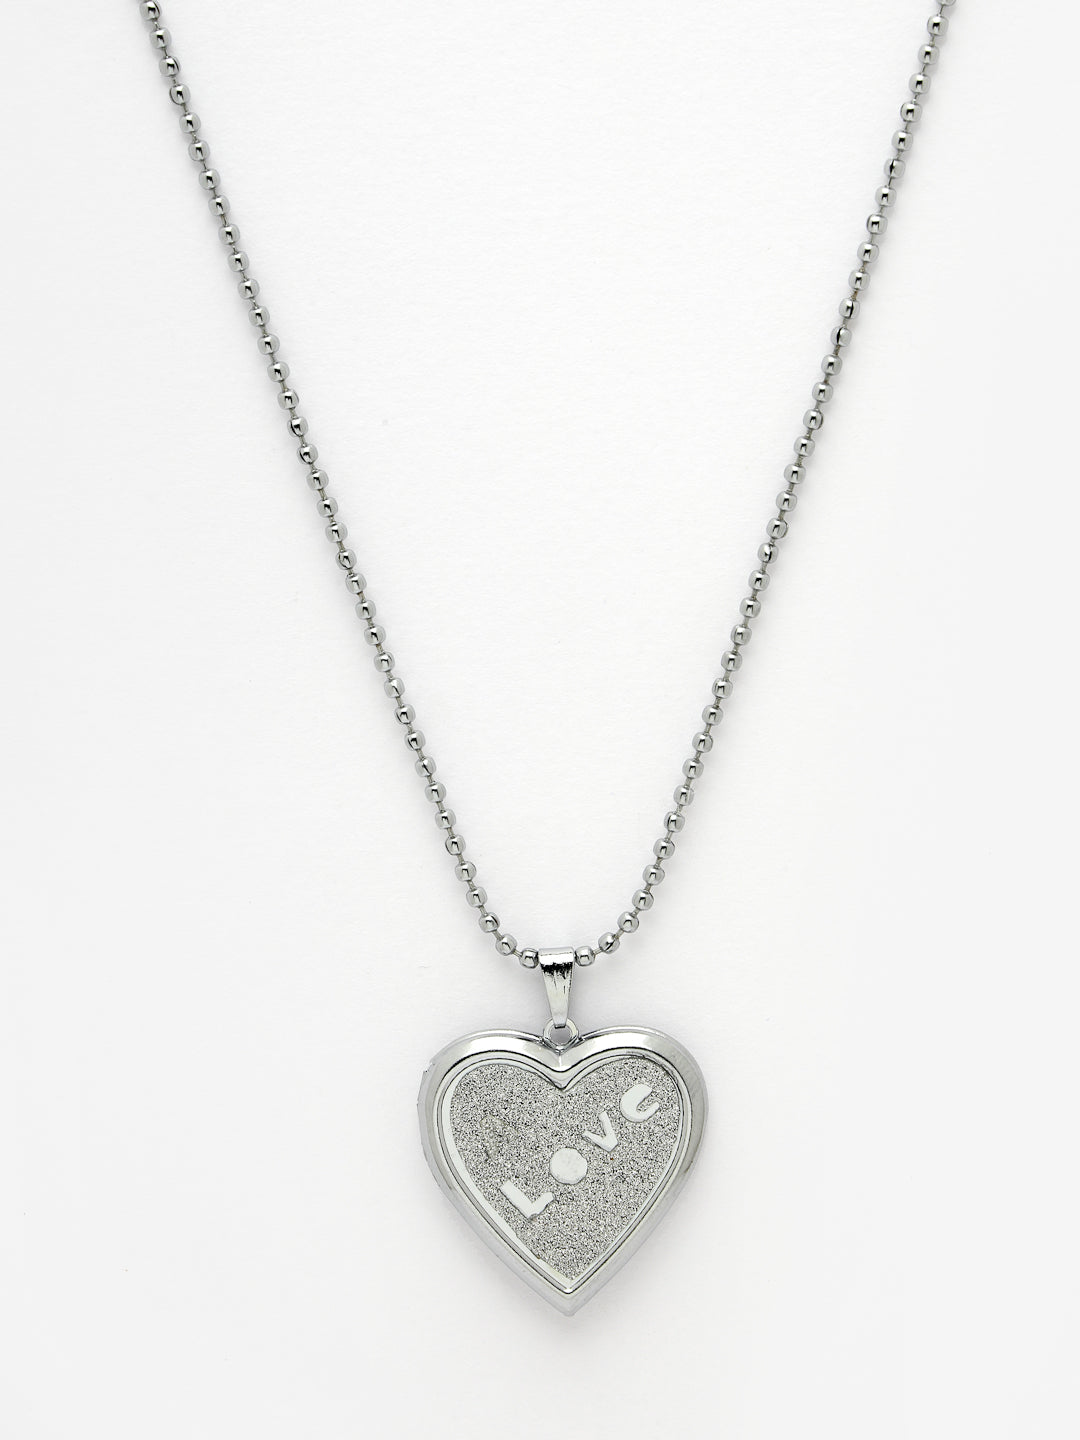 Men's silver plated heart shaped pendent with picture frame and chain - NVR